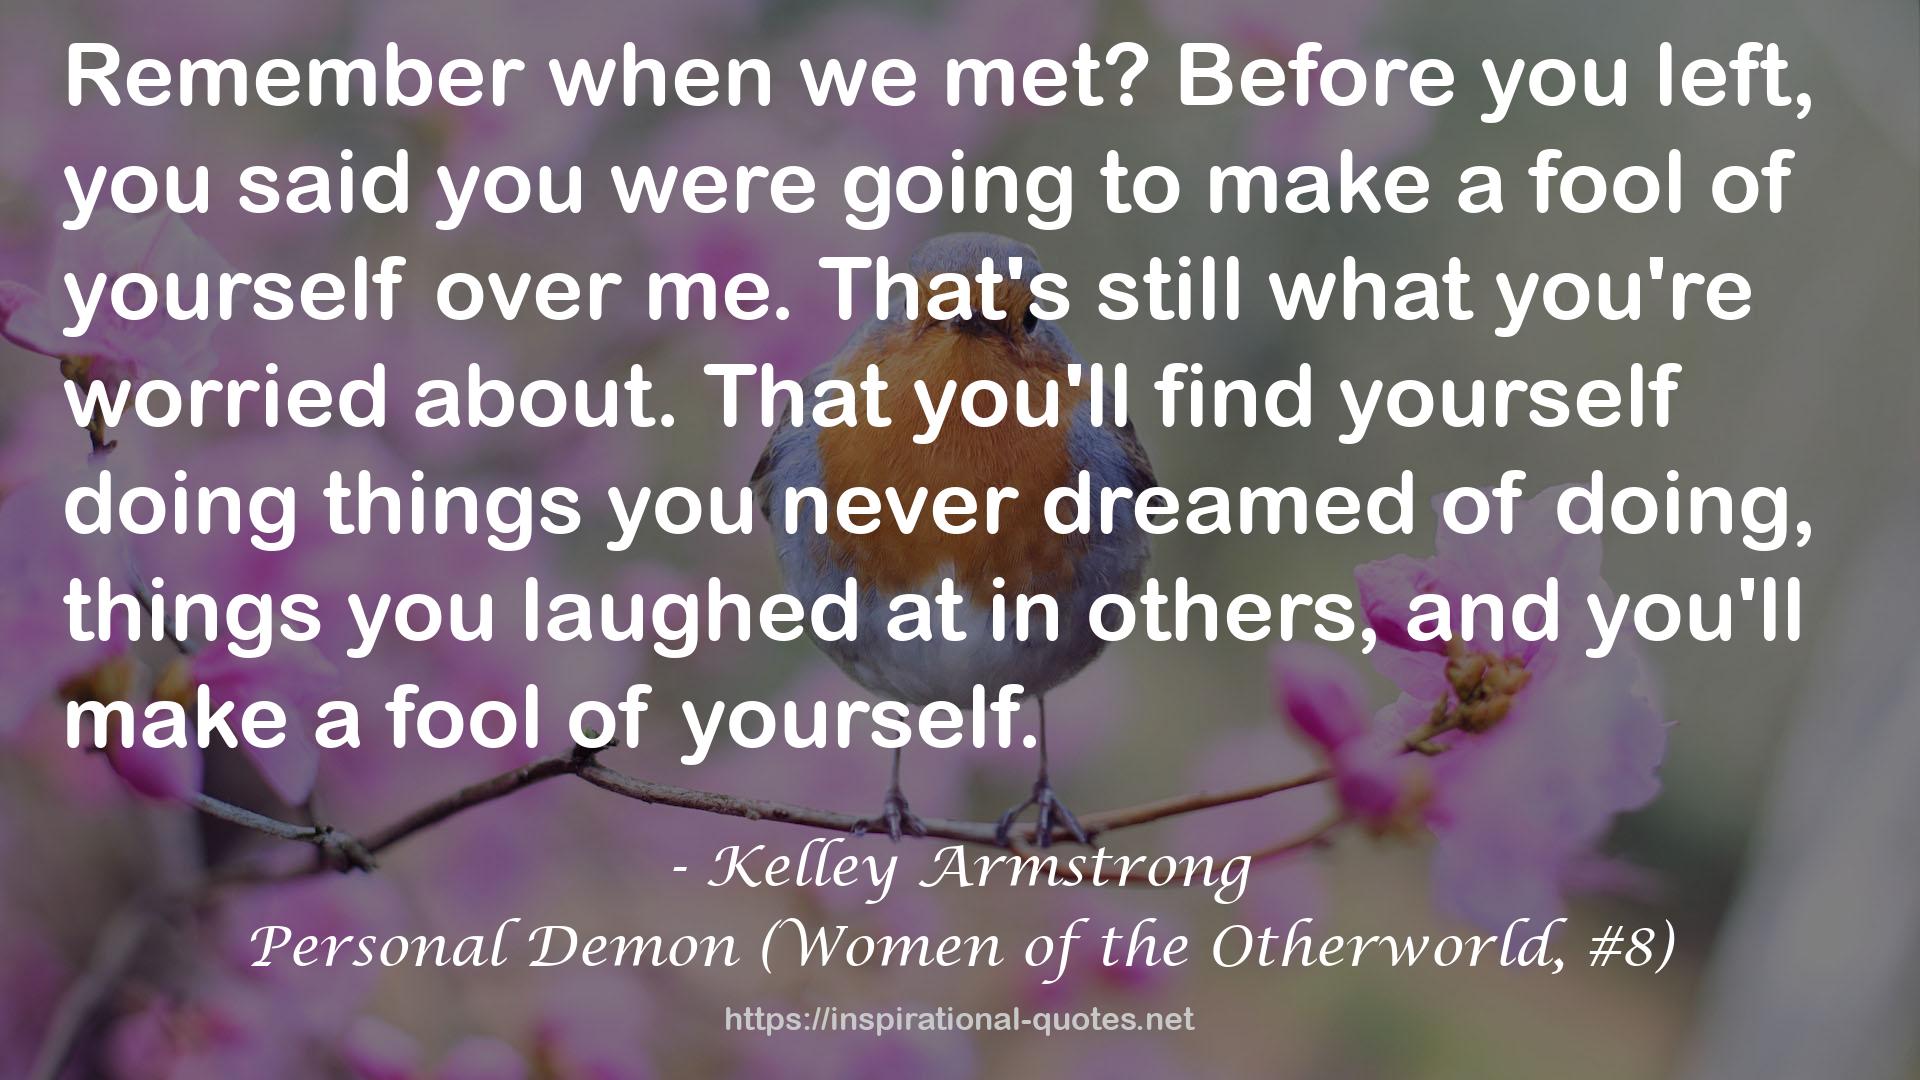 Personal Demon (Women of the Otherworld, #8) QUOTES